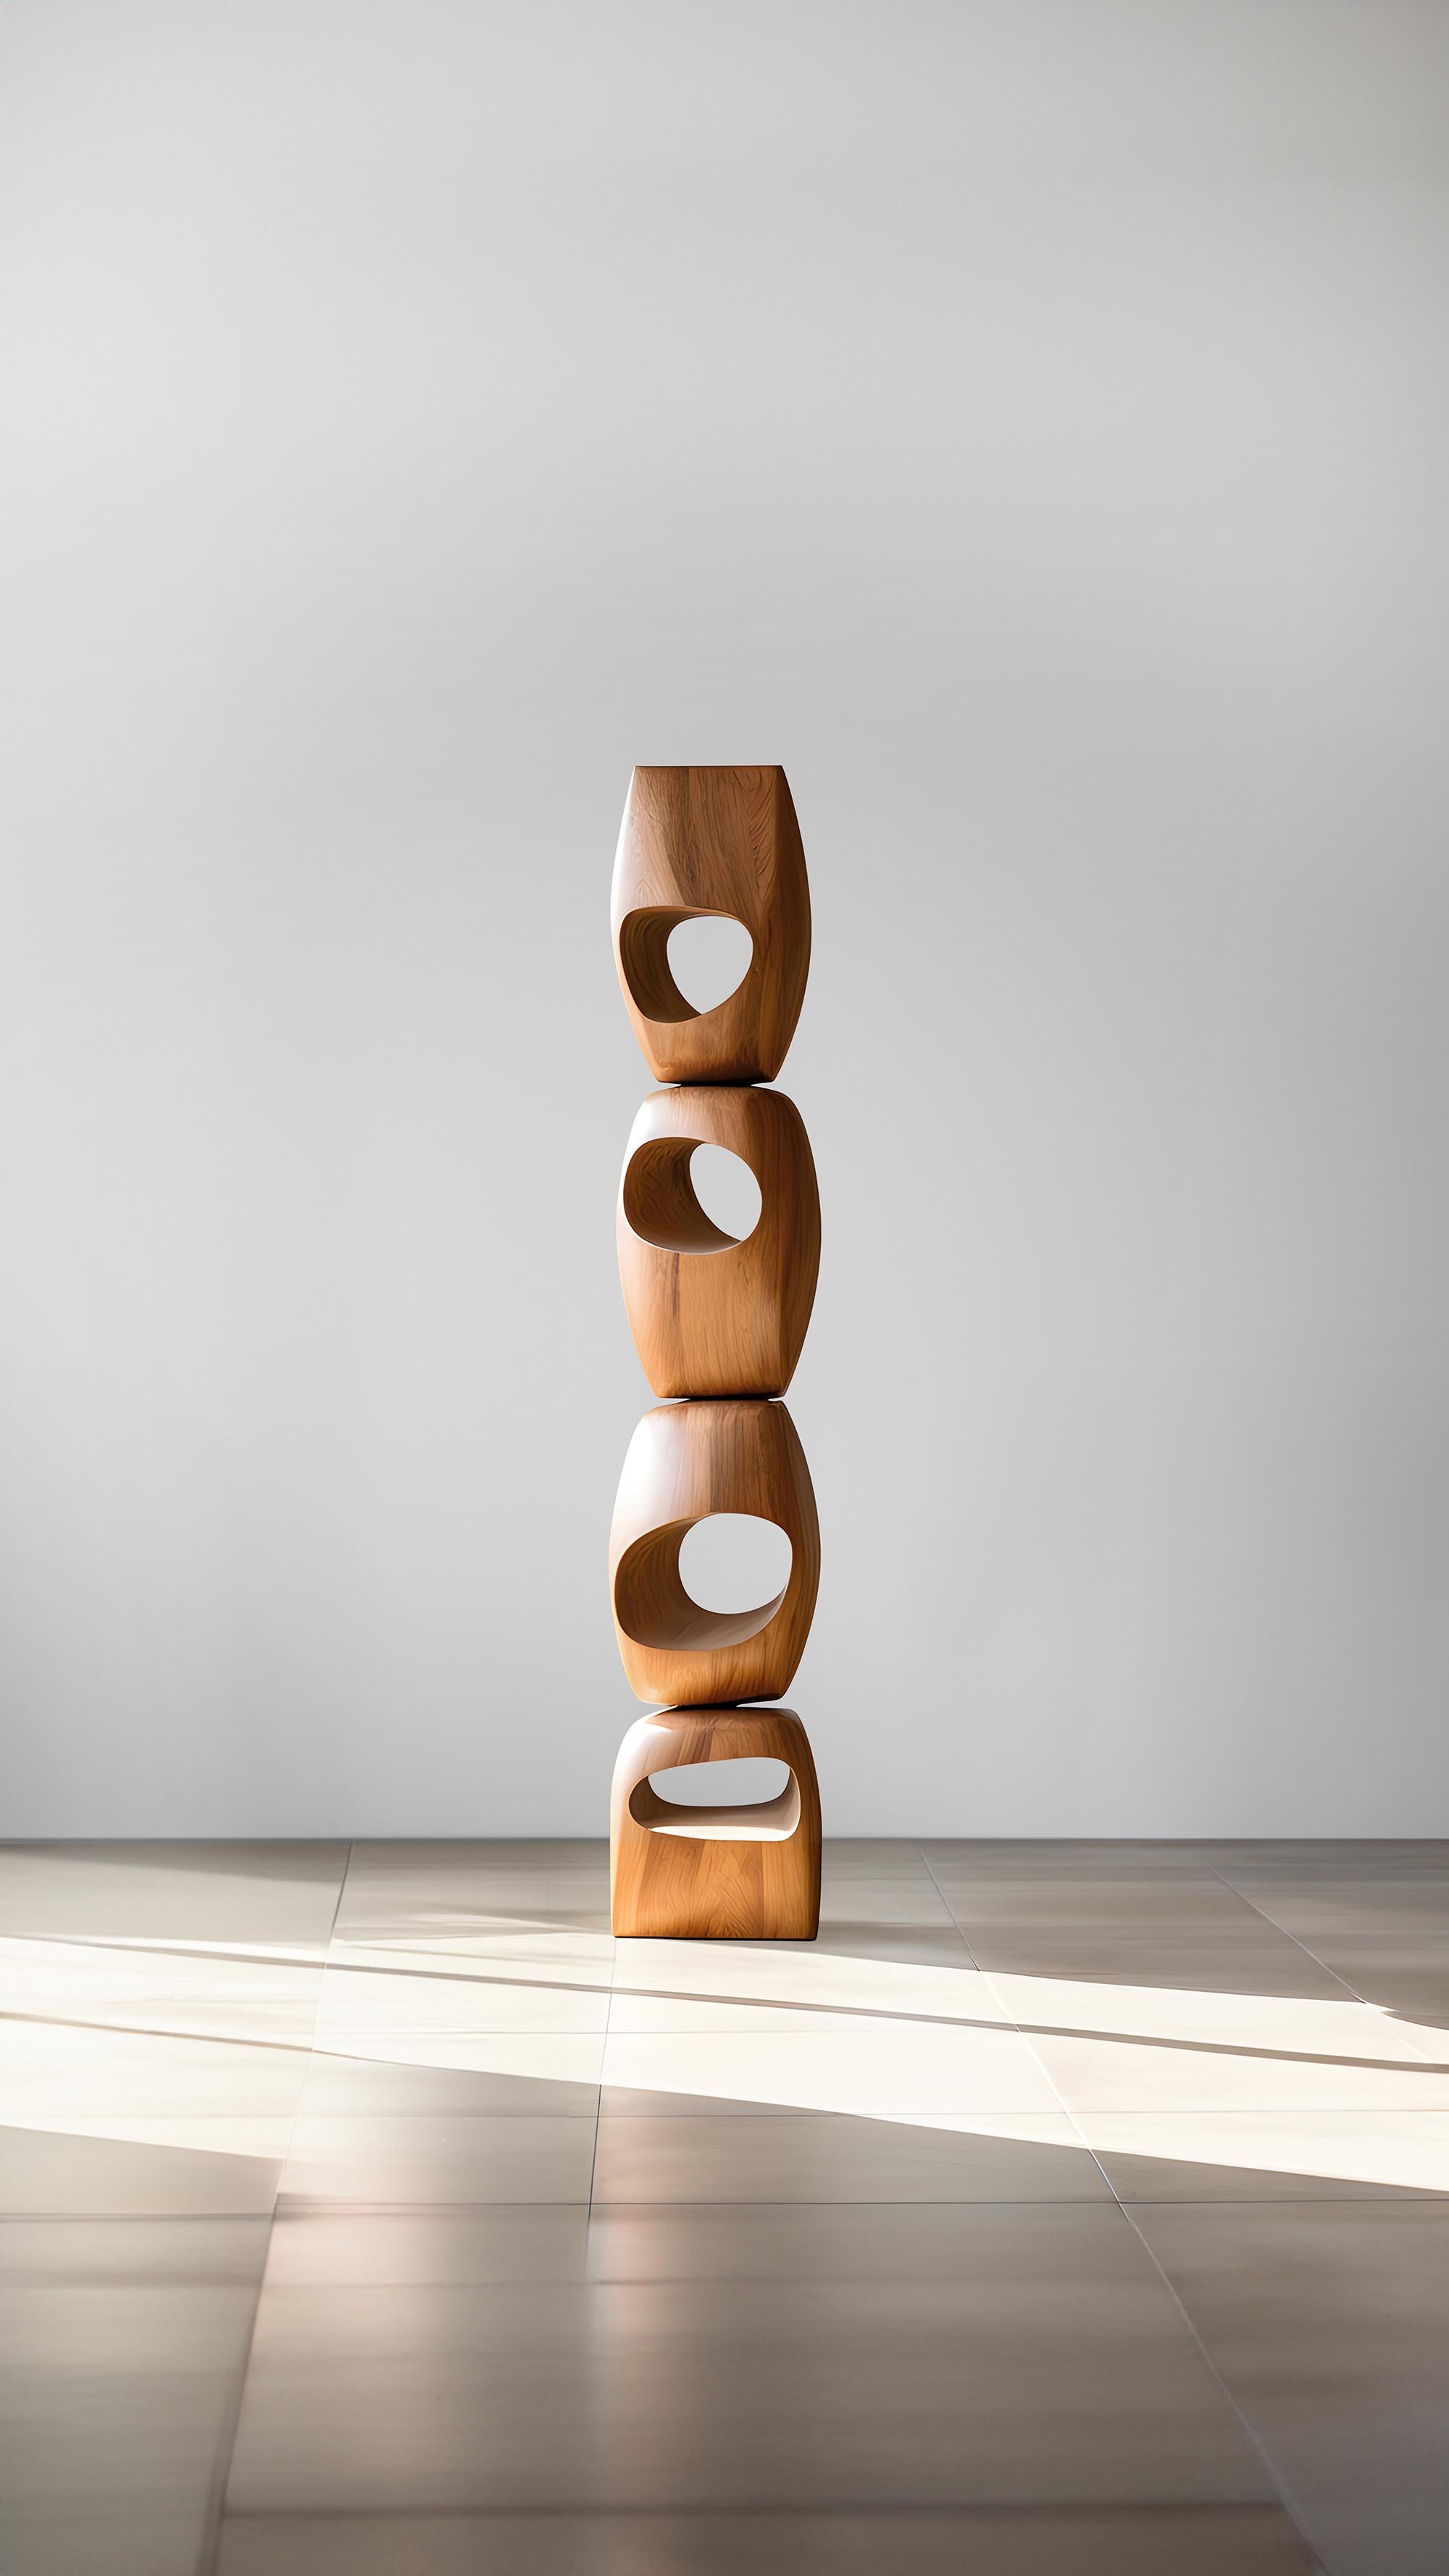 Mid-Century Modern Still Stand No56: Abstract Wooden Grace by NONO, Modern Escalona Sculpture For Sale